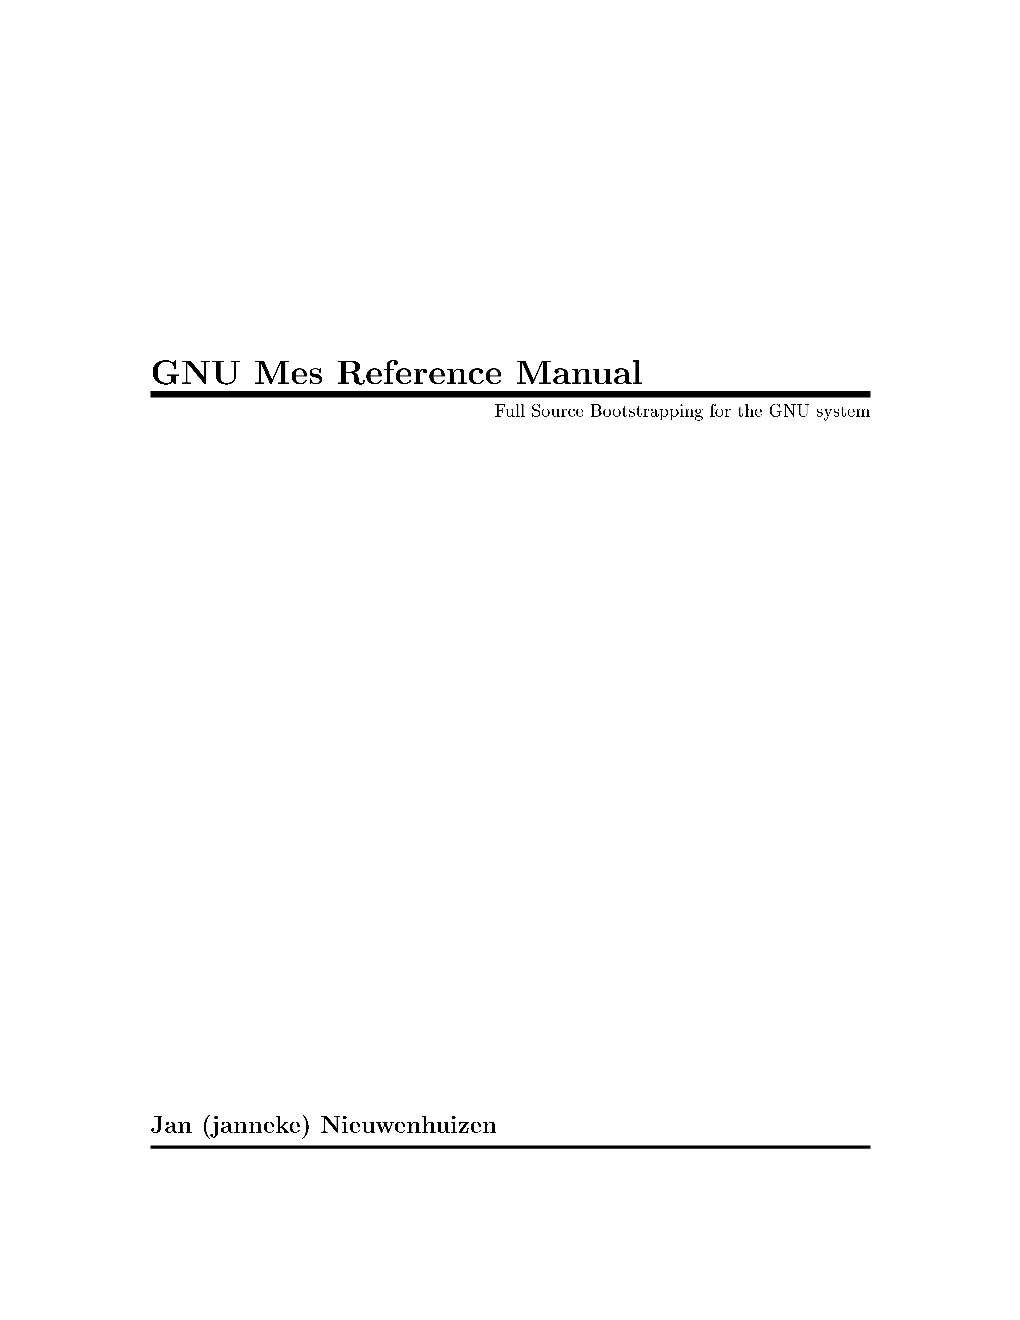 GNU Mes Reference Manual Full Source Bootstrapping for the GNU System